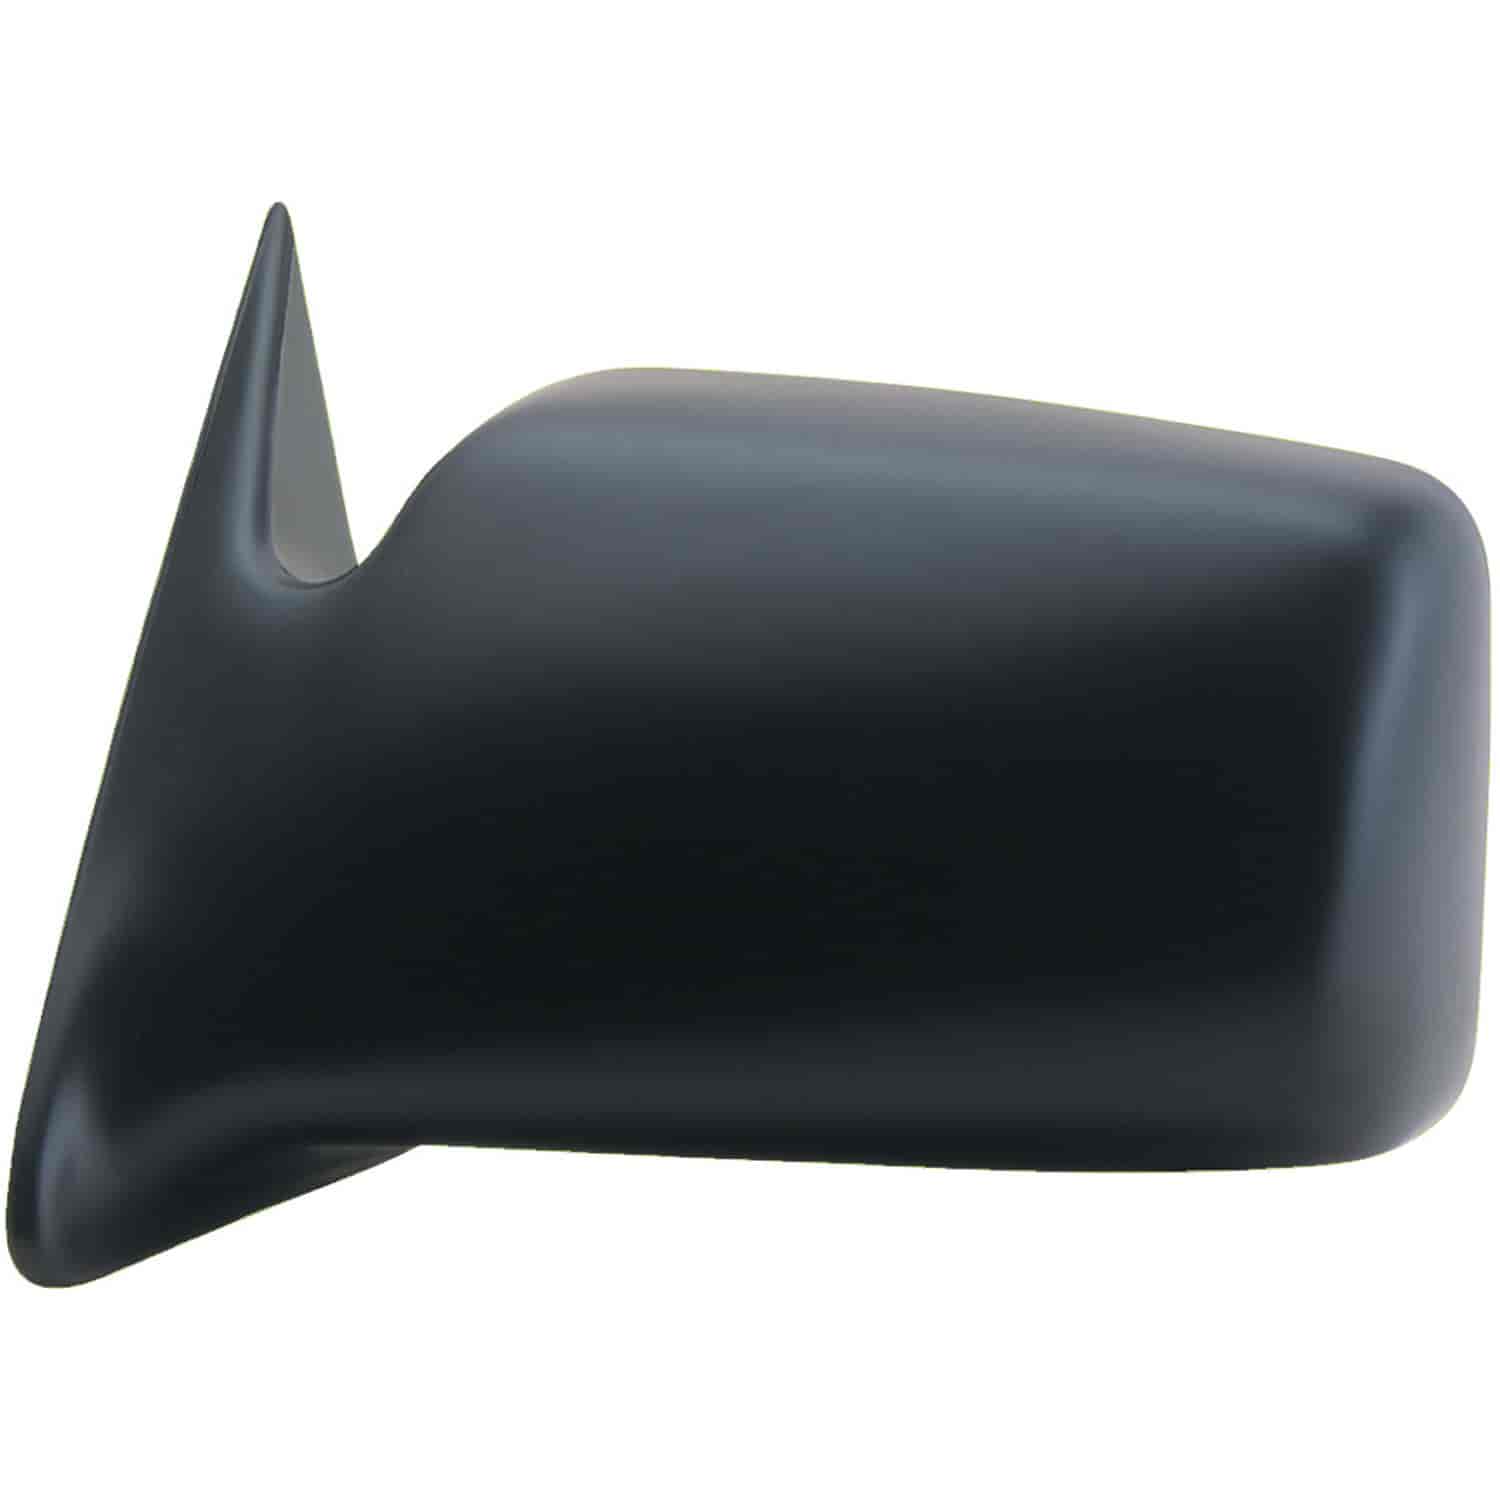 OEM Style Replacement mirror for 87-96 Dodge Dakota Pick-Up 5x7 standard driver side mirror tested t